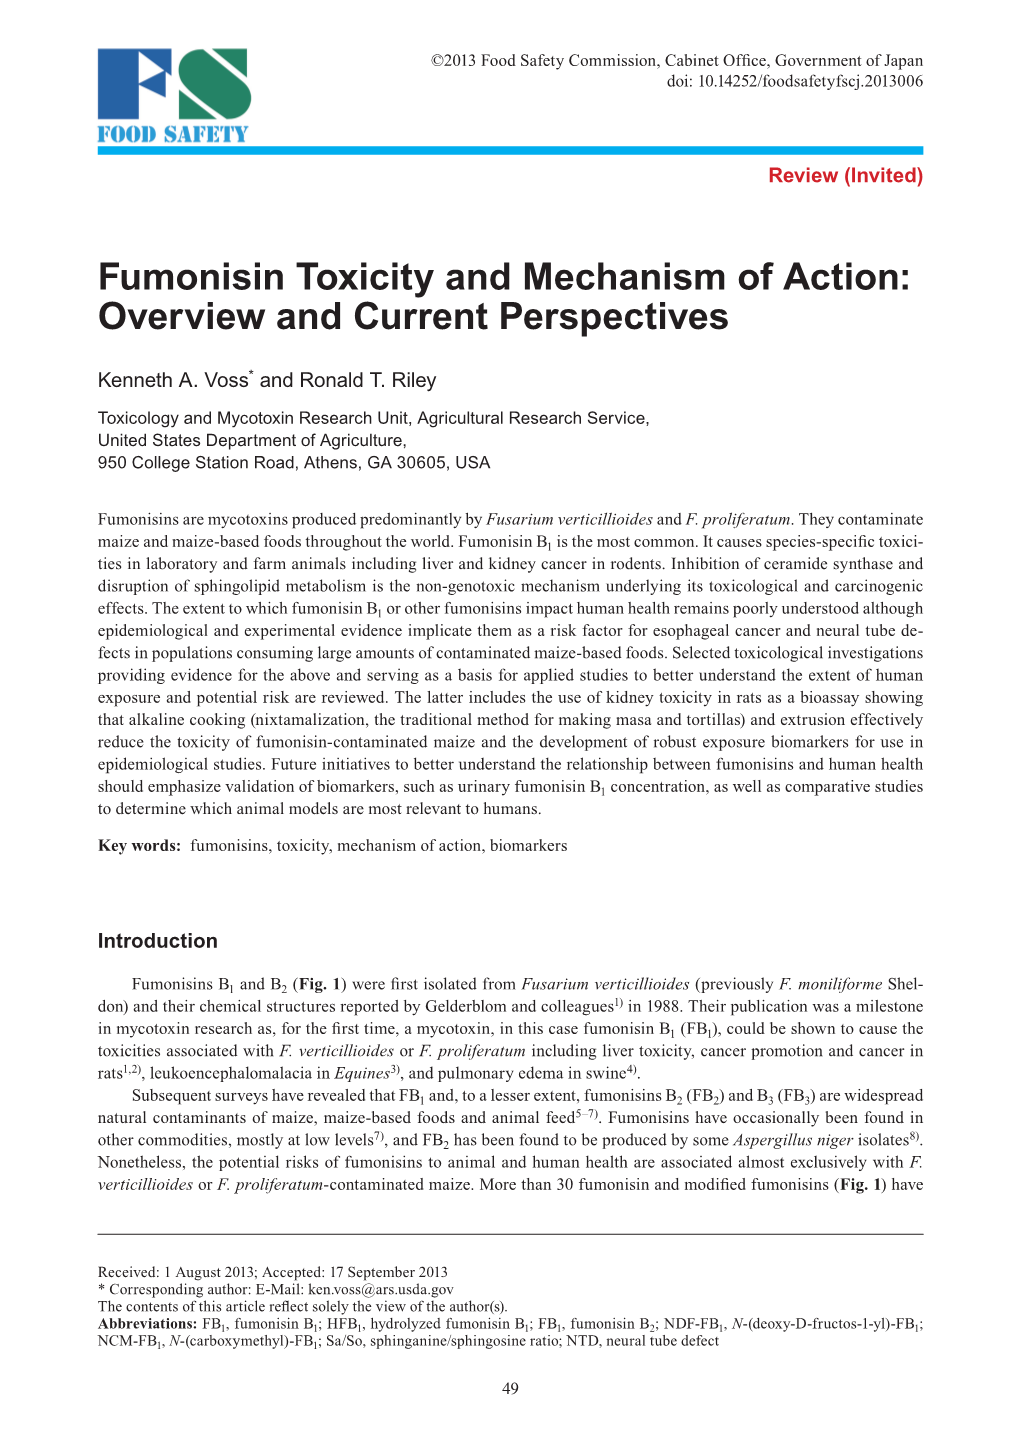 Fumonisin Toxicity and Mechanism of Action: Overview and Current Perspectives